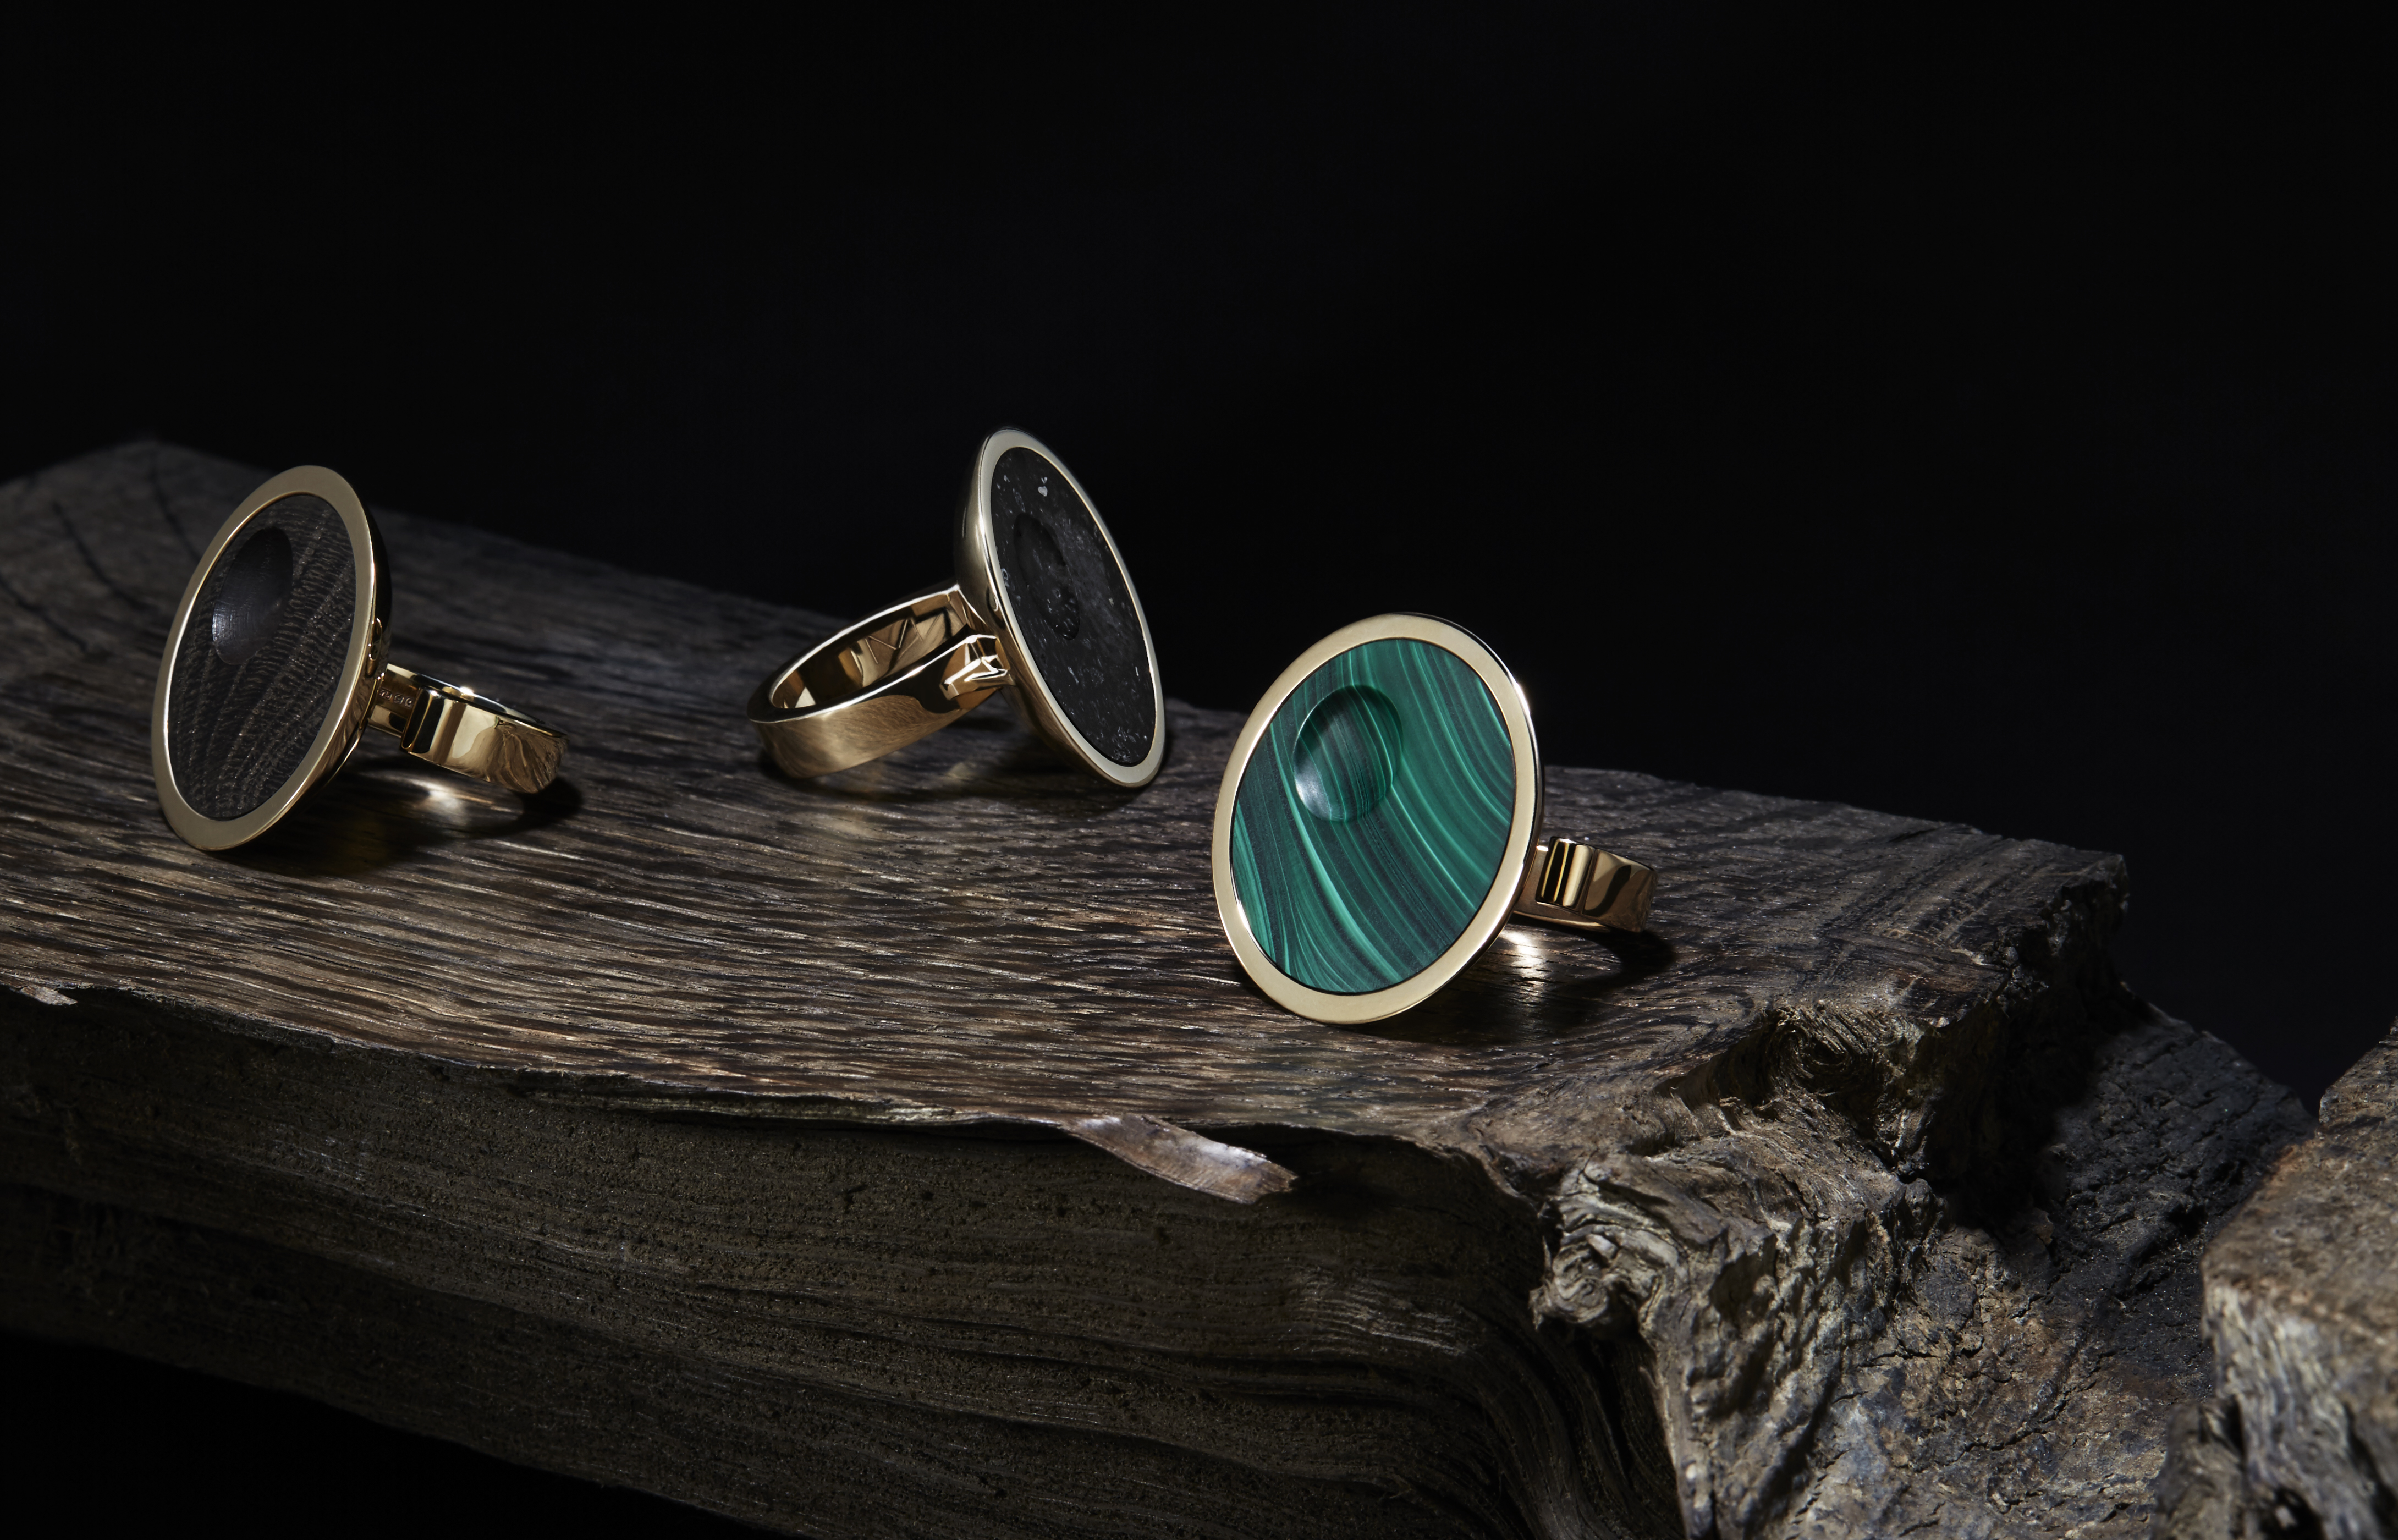 Collection of Oscar rings in solid gold, inset with malachite, eight thousand year old oak or meteorite.